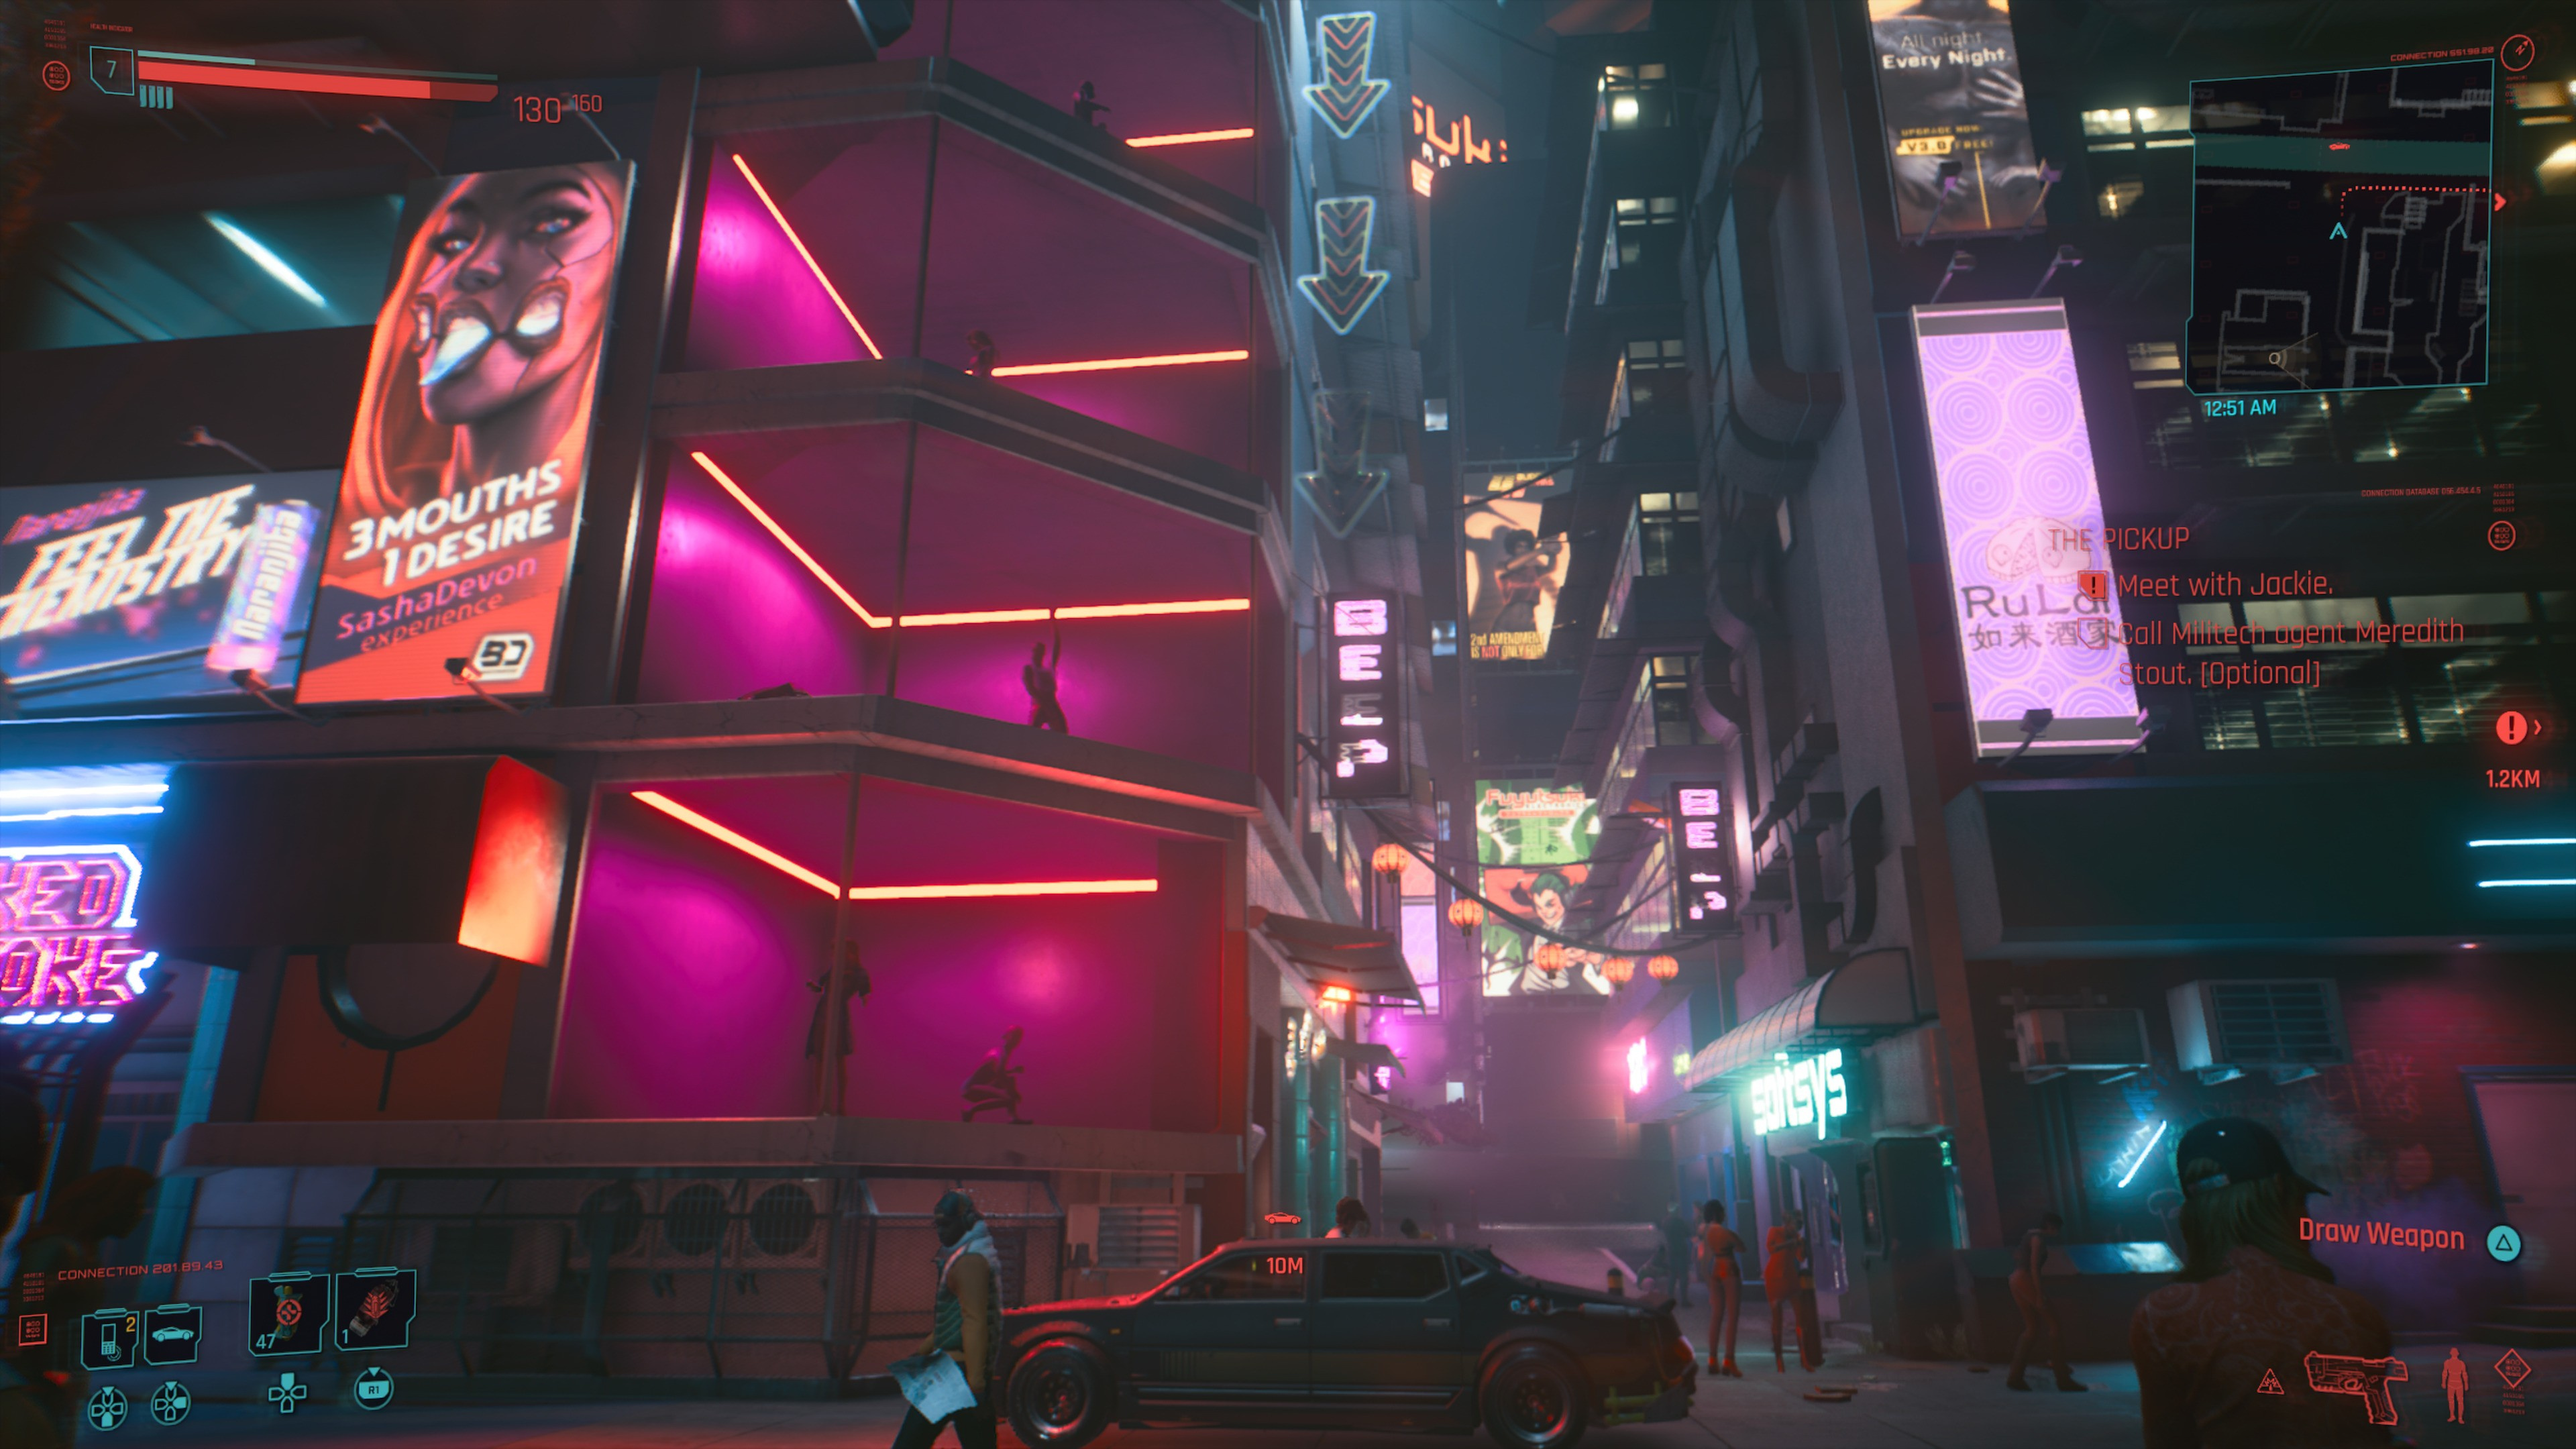 Hands On This Is How Cyberpunk 2077 Runs on PS5, PS4 Pro, and PS4